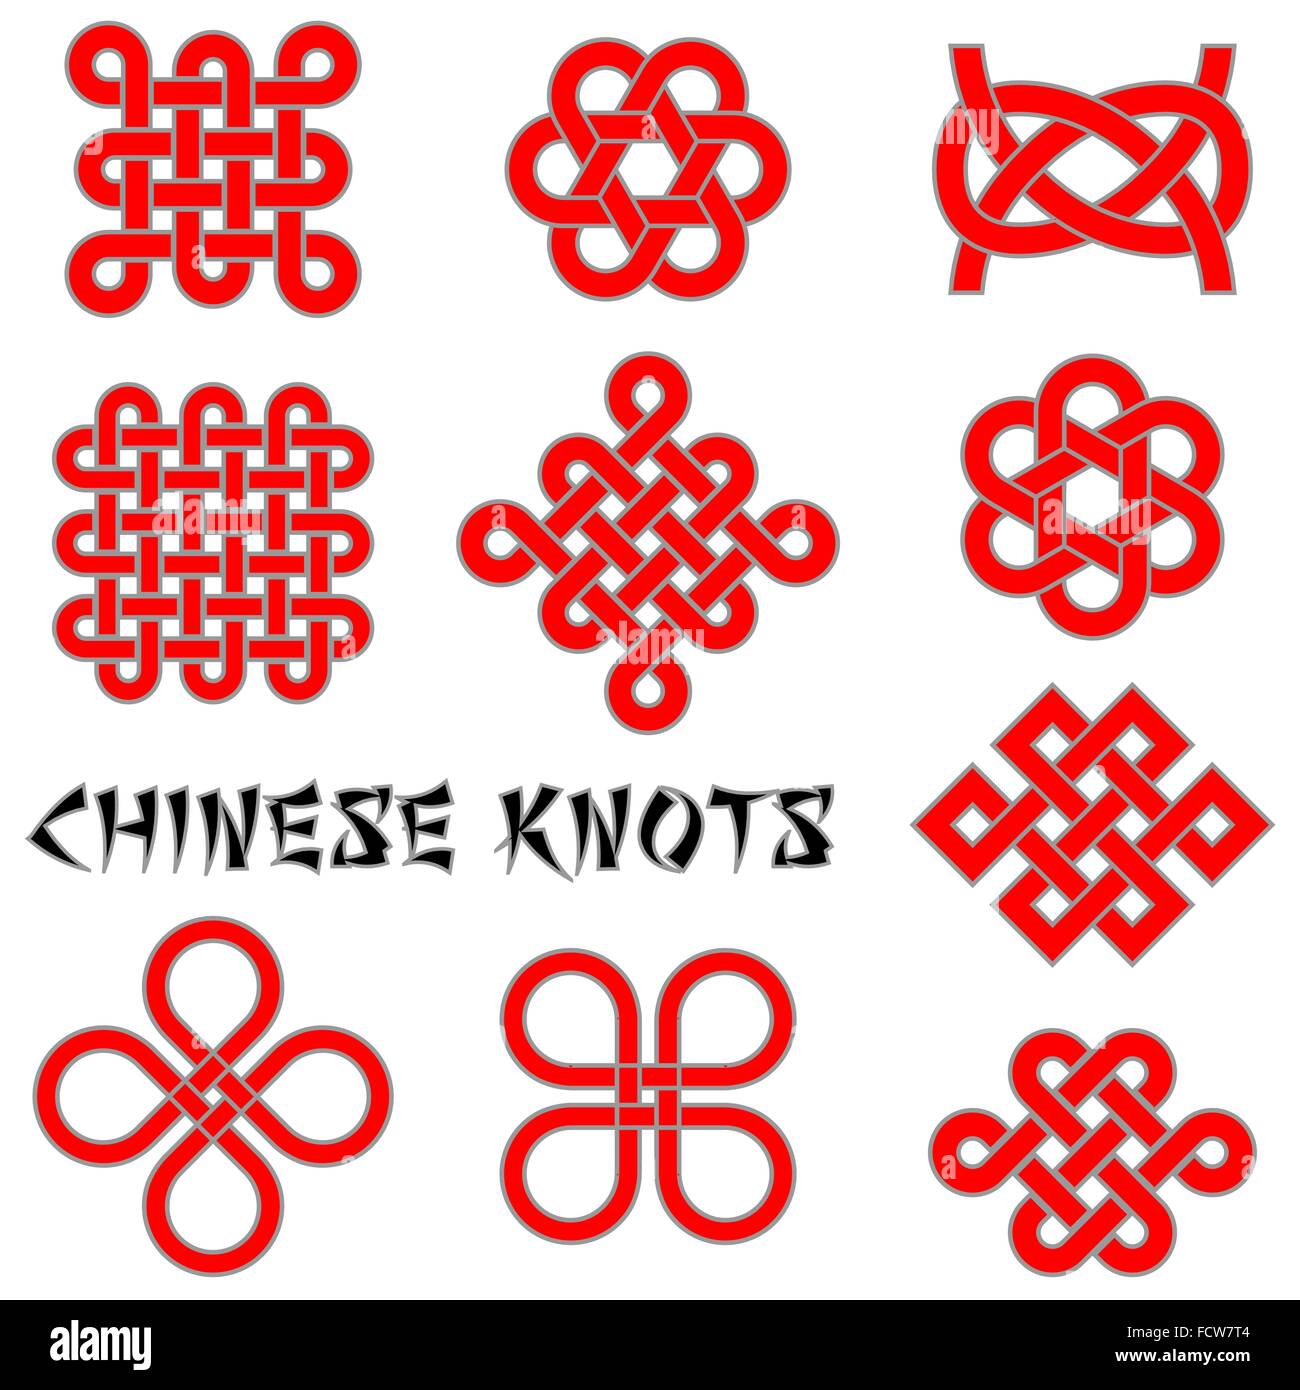 Chinese knots (Clover Leaf, Flower Knot, Endless Knot, etc.) collection for your design or project Stock Vector